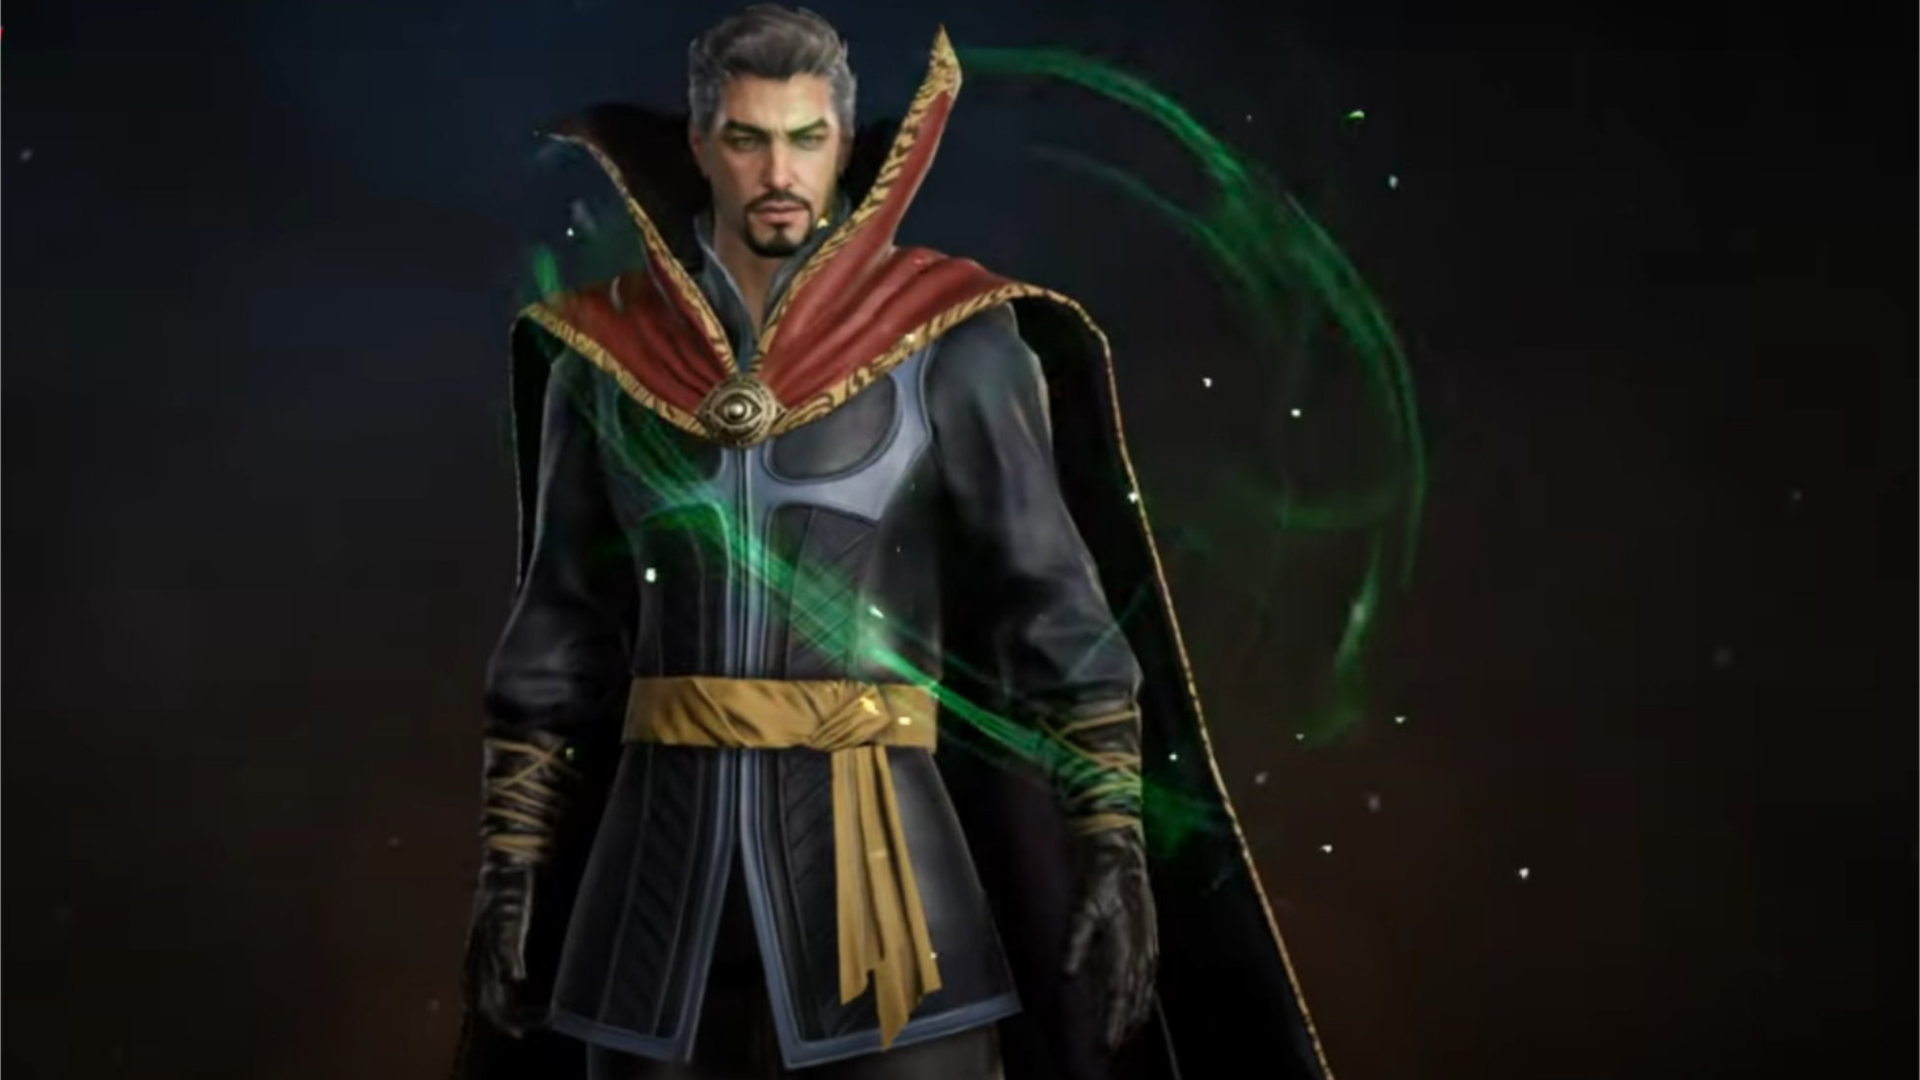 Marvel Future Revolution Doctor Strange Build, Outfits, Skills, Specialisations, Potential, And More - DAMN OS thumbnail